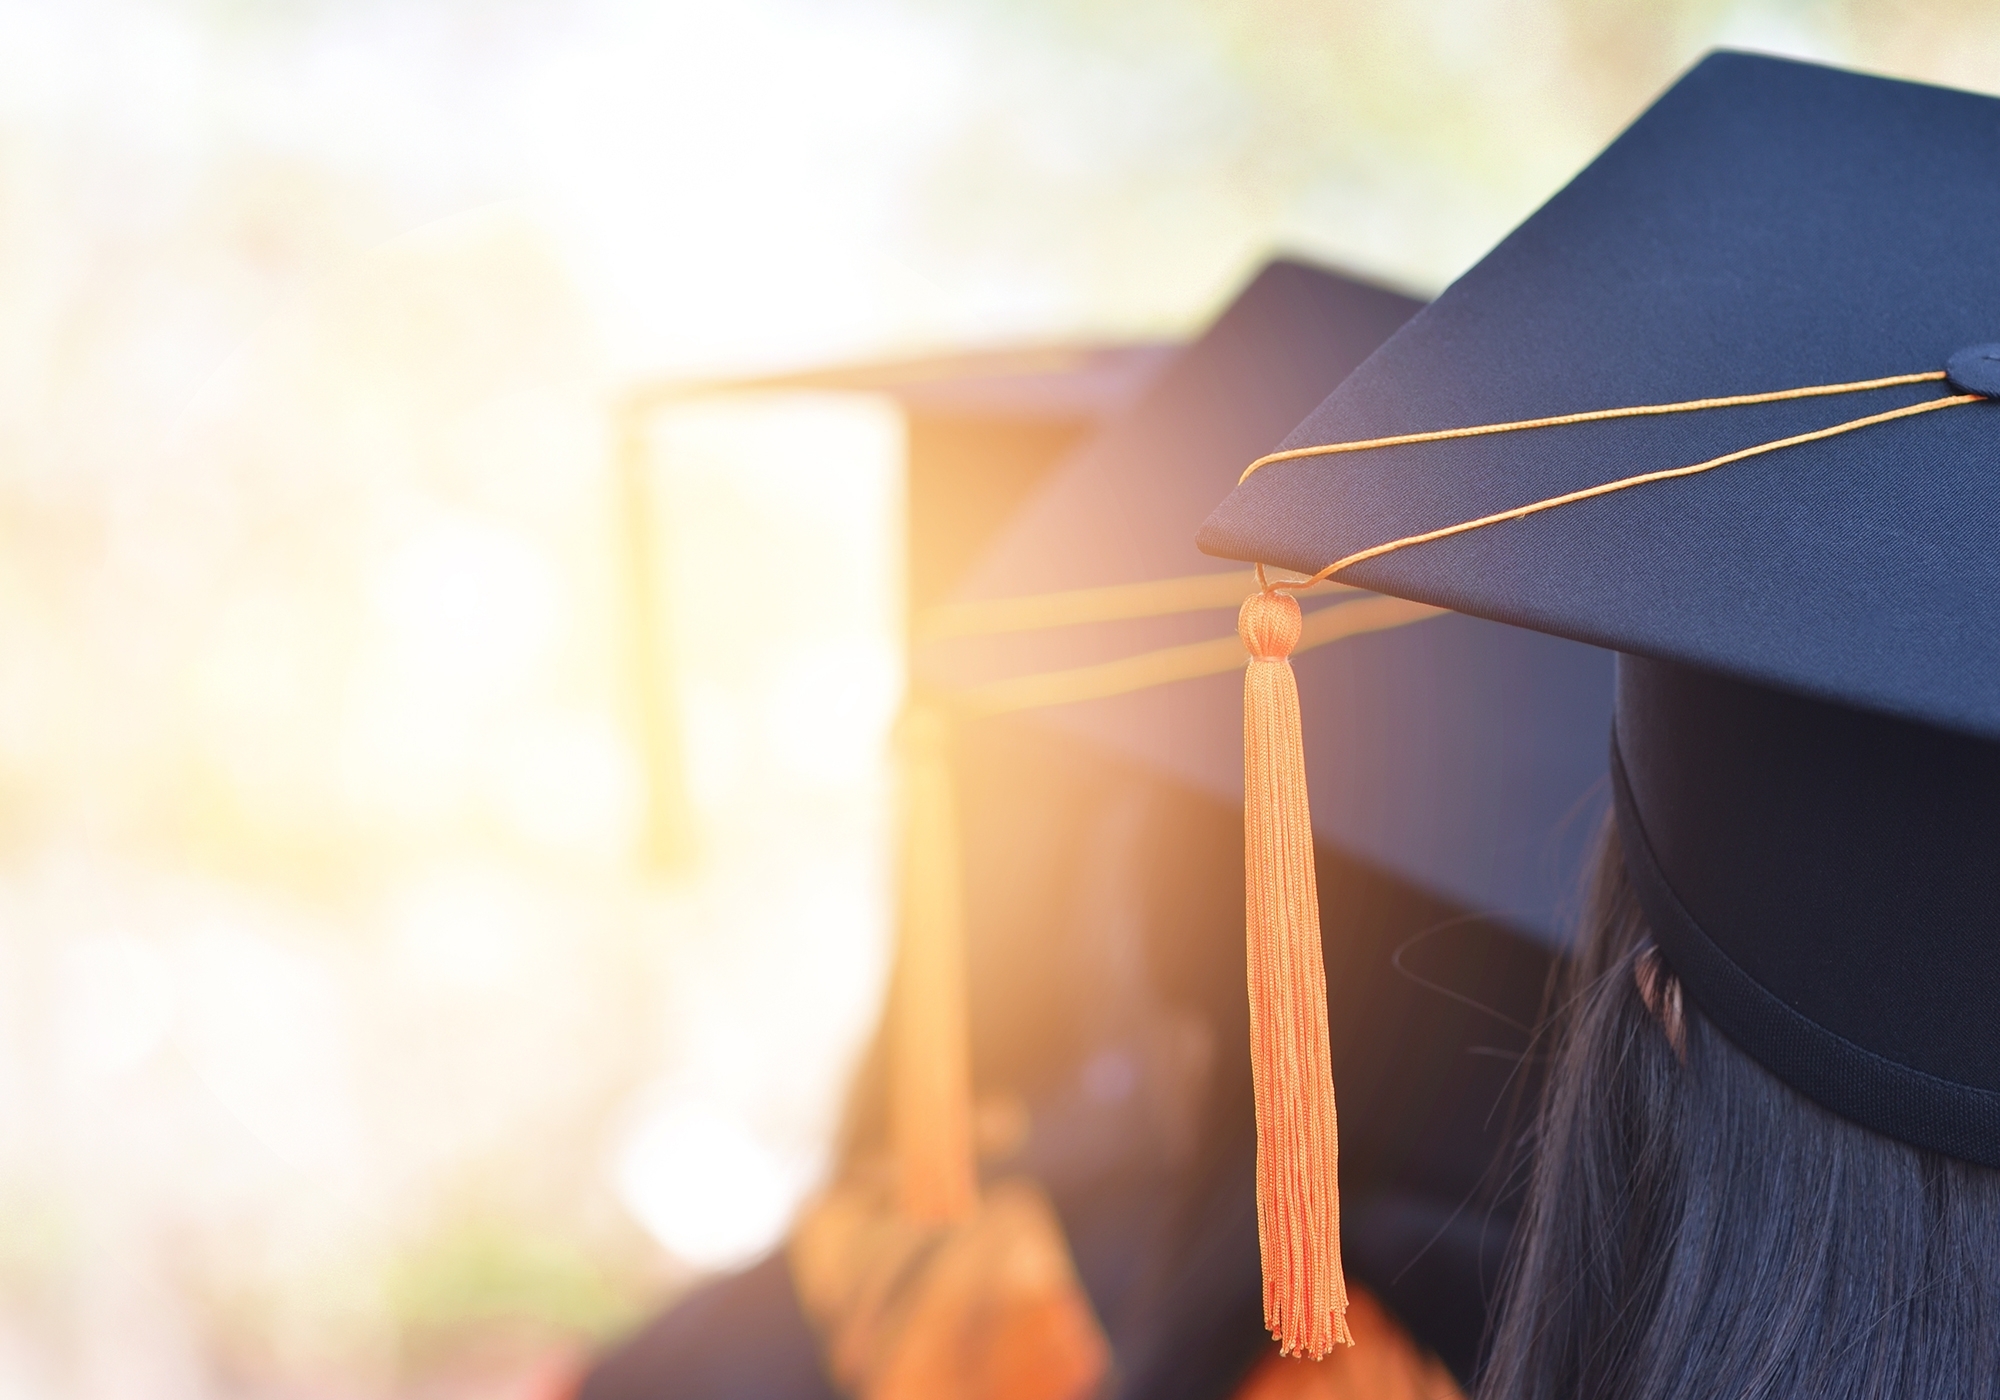 529 College Savings Plans: What You Need to Know